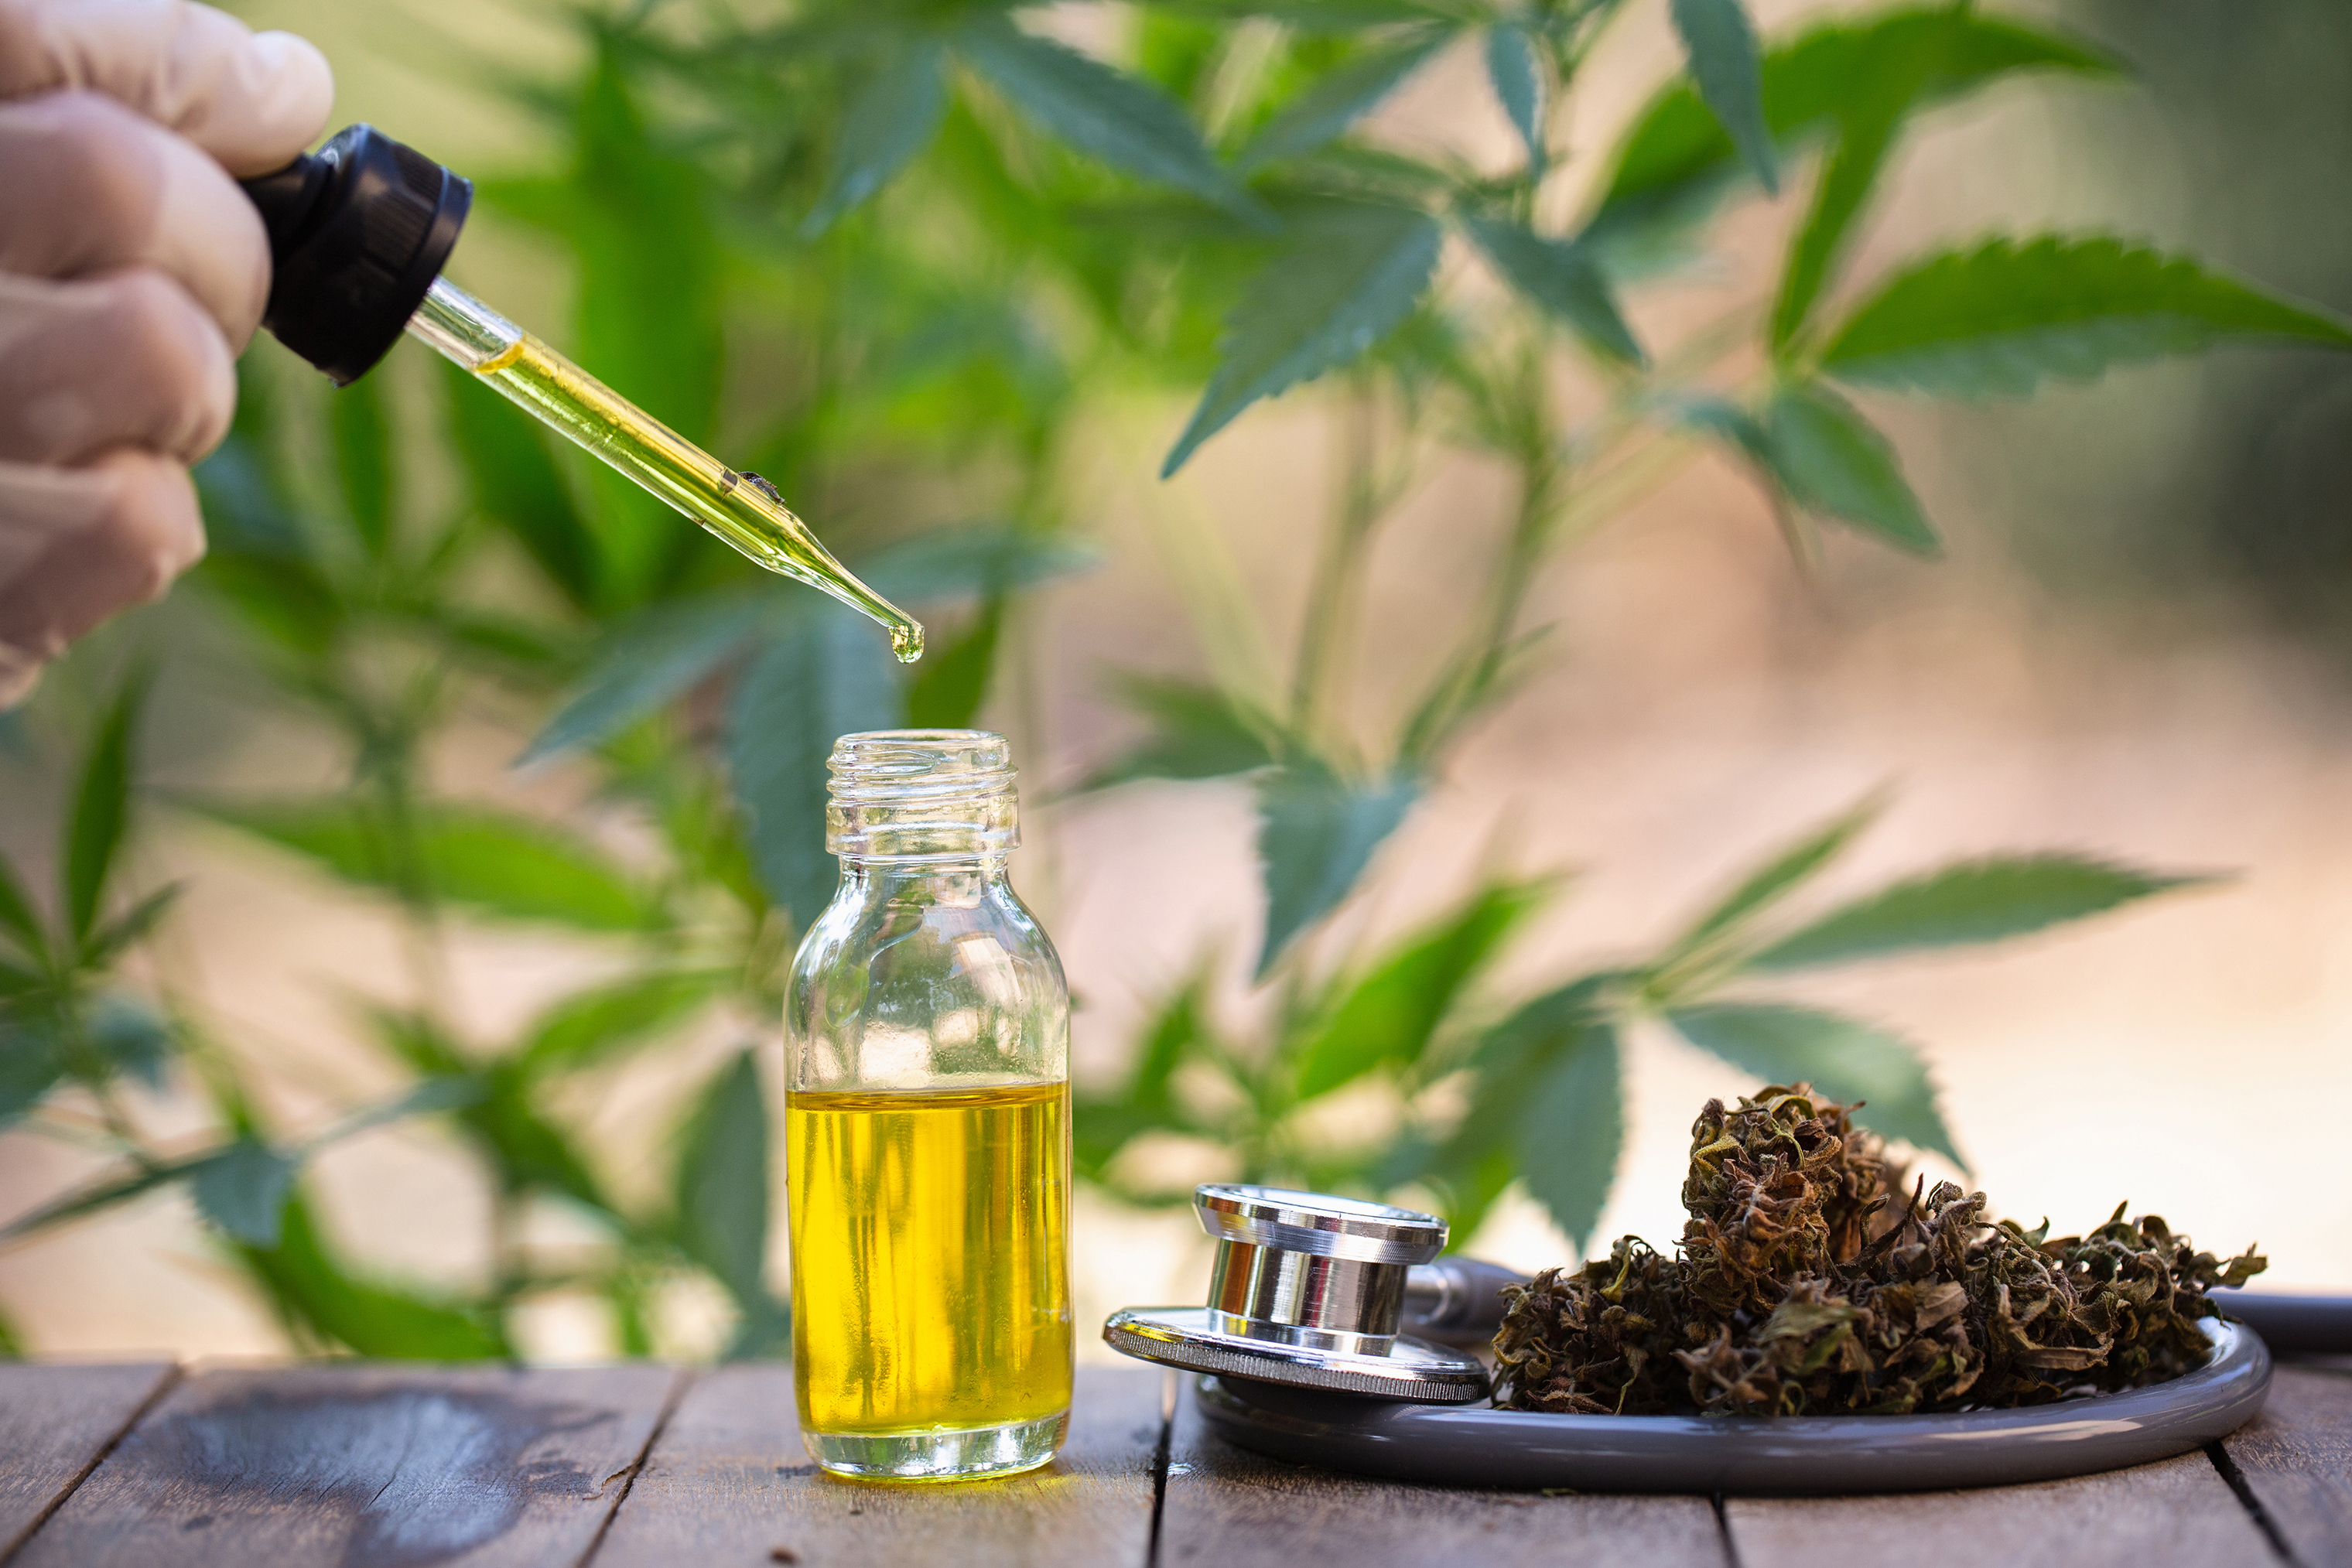 What Is The Normal Price Range For Cbd Oil - Cbd|Oil|Cannabidiol|Products|View|Abstract|Effects|Hemp|Cannabis|Product|Thc|Pain|People|Health|Body|Plant|Cannabinoids|Medications|Oils|Drug|Benefits|System|Study|Marijuana|Anxiety|Side|Research|Effect|Liver|Quality|Treatment|Studies|Epilepsy|Symptoms|Gummies|Compounds|Dose|Time|Inflammation|Bottle|Cbd Oil|View Abstract|Side Effects|Cbd Products|Endocannabinoid System|Multiple Sclerosis|Cbd Oils|Cbd Gummies|Cannabis Plant|Hemp Oil|Cbd Product|Hemp Plant|United States|Cytochrome P450|Many People|Chronic Pain|Nuleaf Naturals|Royal Cbd|Full-Spectrum Cbd Oil|Drug Administration|Cbd Oil Products|Medical Marijuana|Drug Test|Heavy Metals|Clinical Trial|Clinical Trials|Cbd Oil Side|Rating Highlights|Wide Variety|Animal Studies